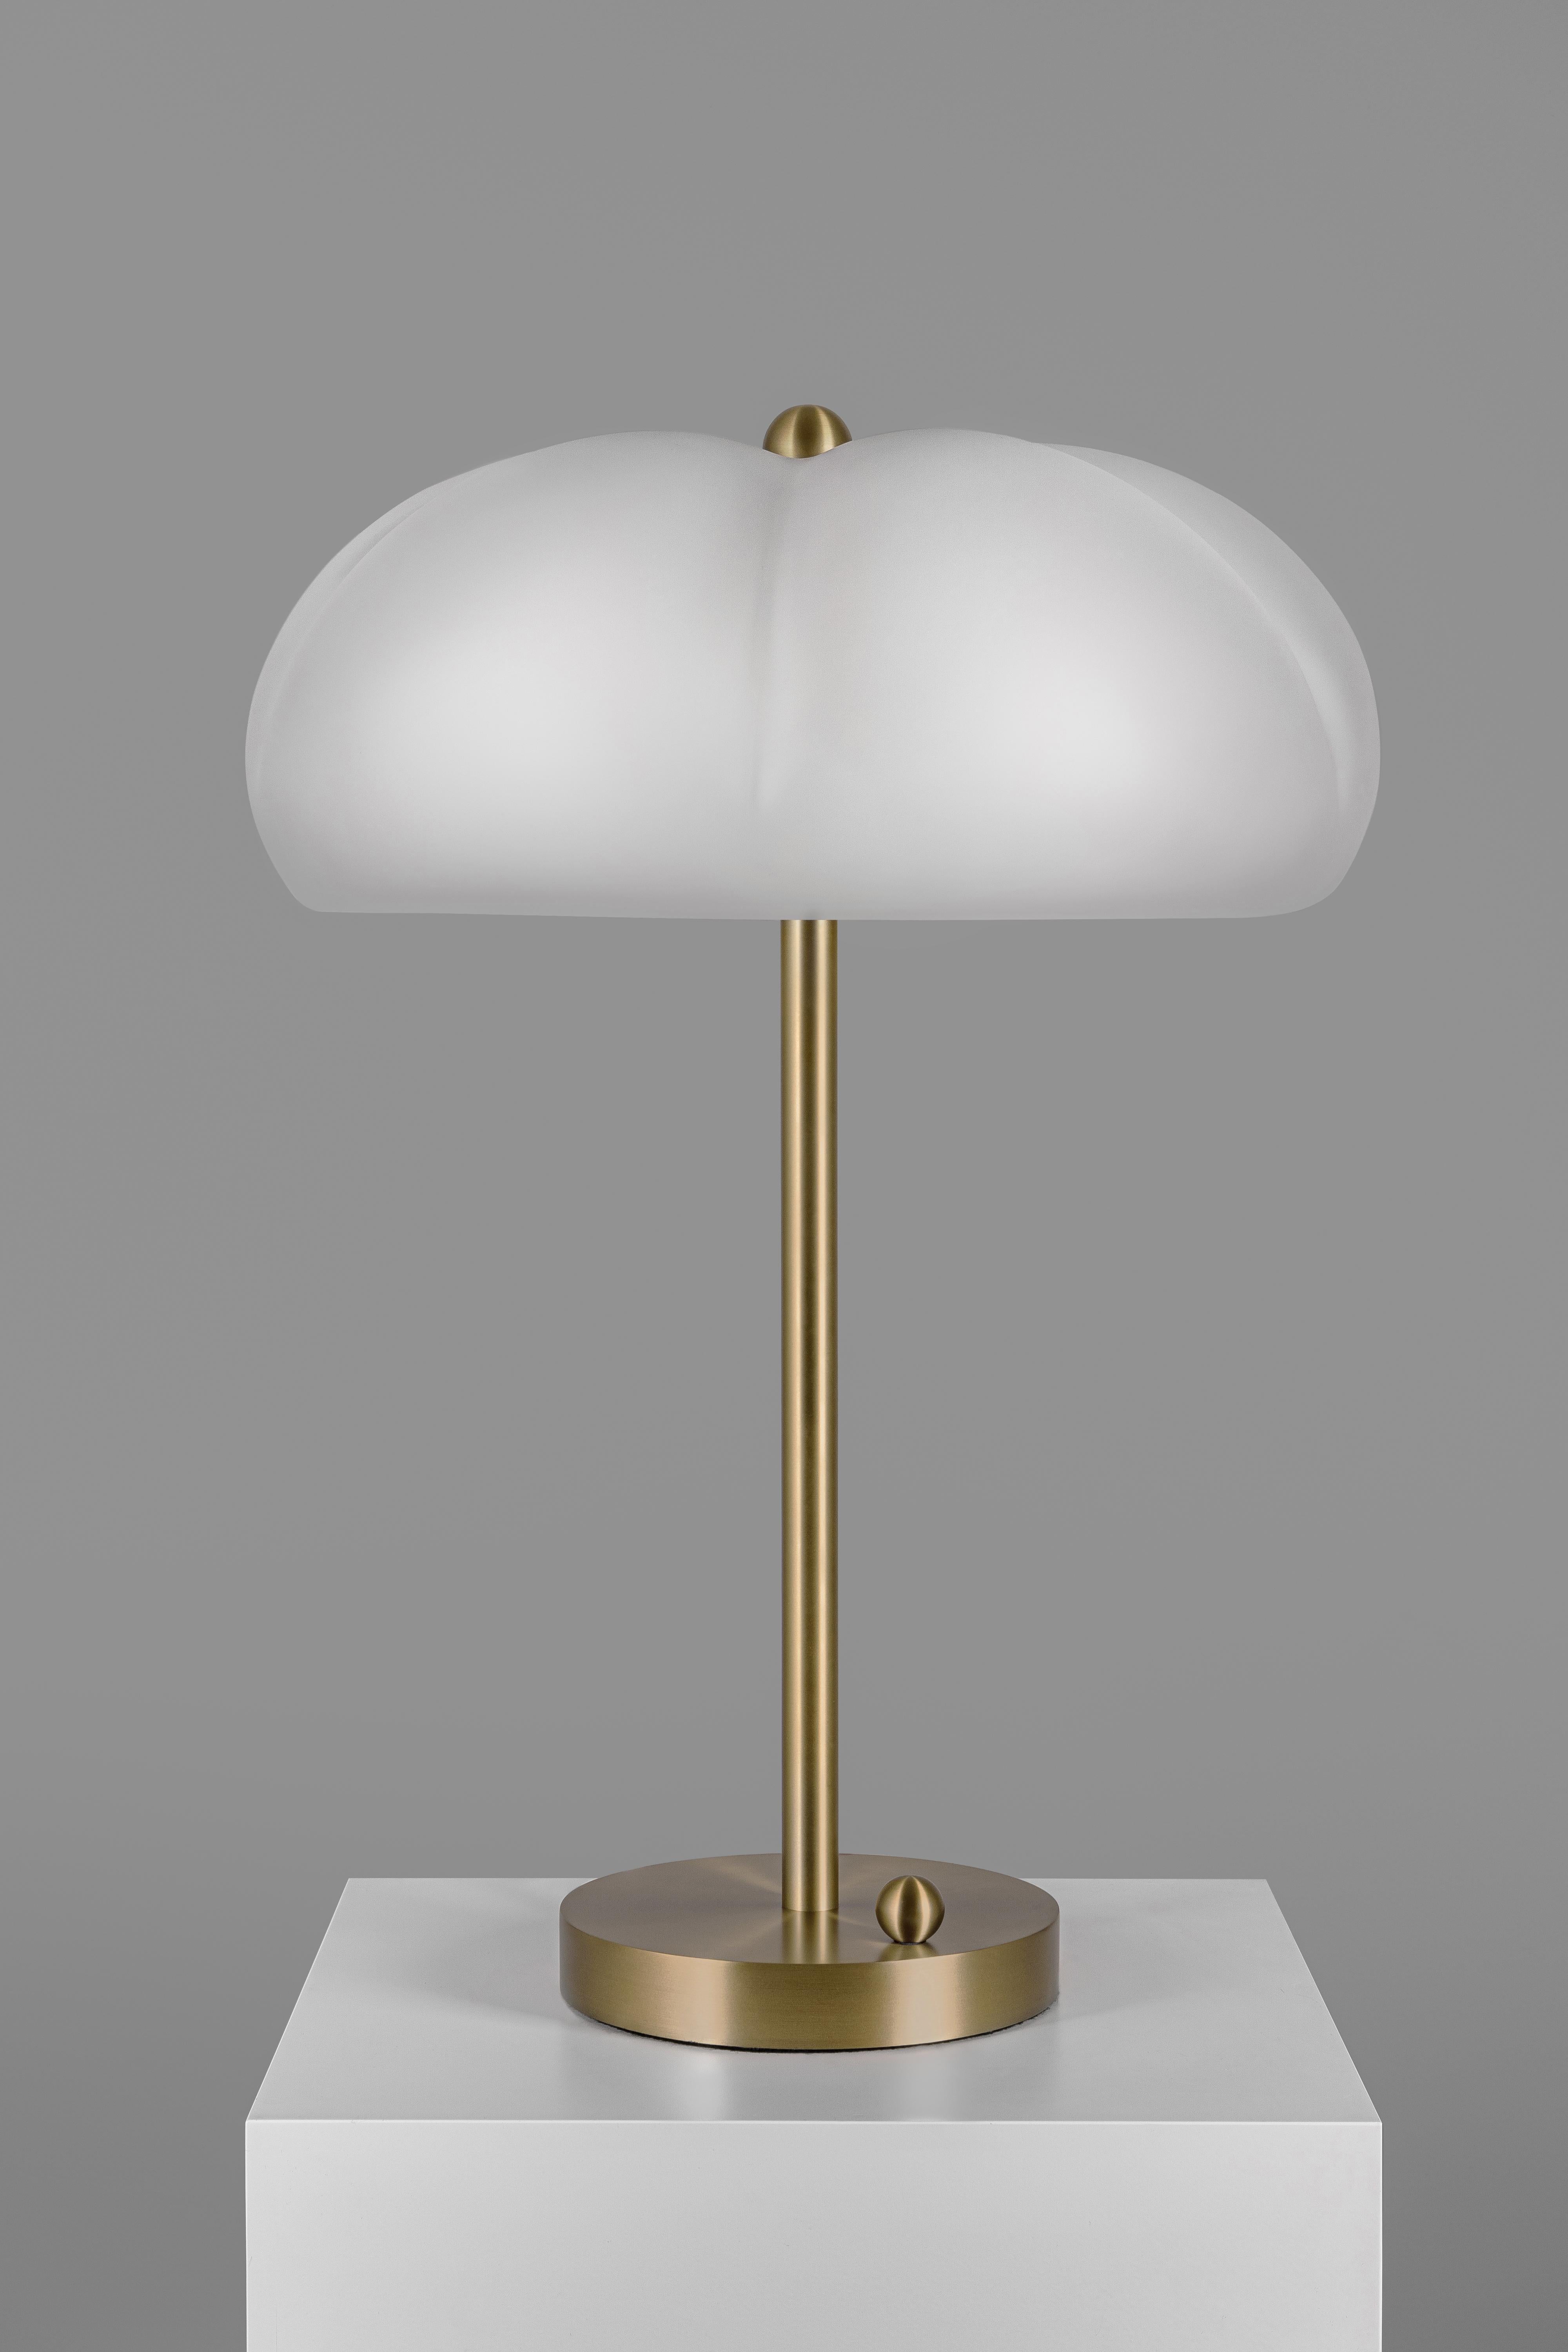 Hana Table Lamp by Schwung
Dimensions: Ø 49 x H 69.5 cm. 
Materials: Lacquered burnished brass and borosilicate sandblasted glass. 

All our lamps can be wired according to each country. If sold to the USA it will be wired for the USA for